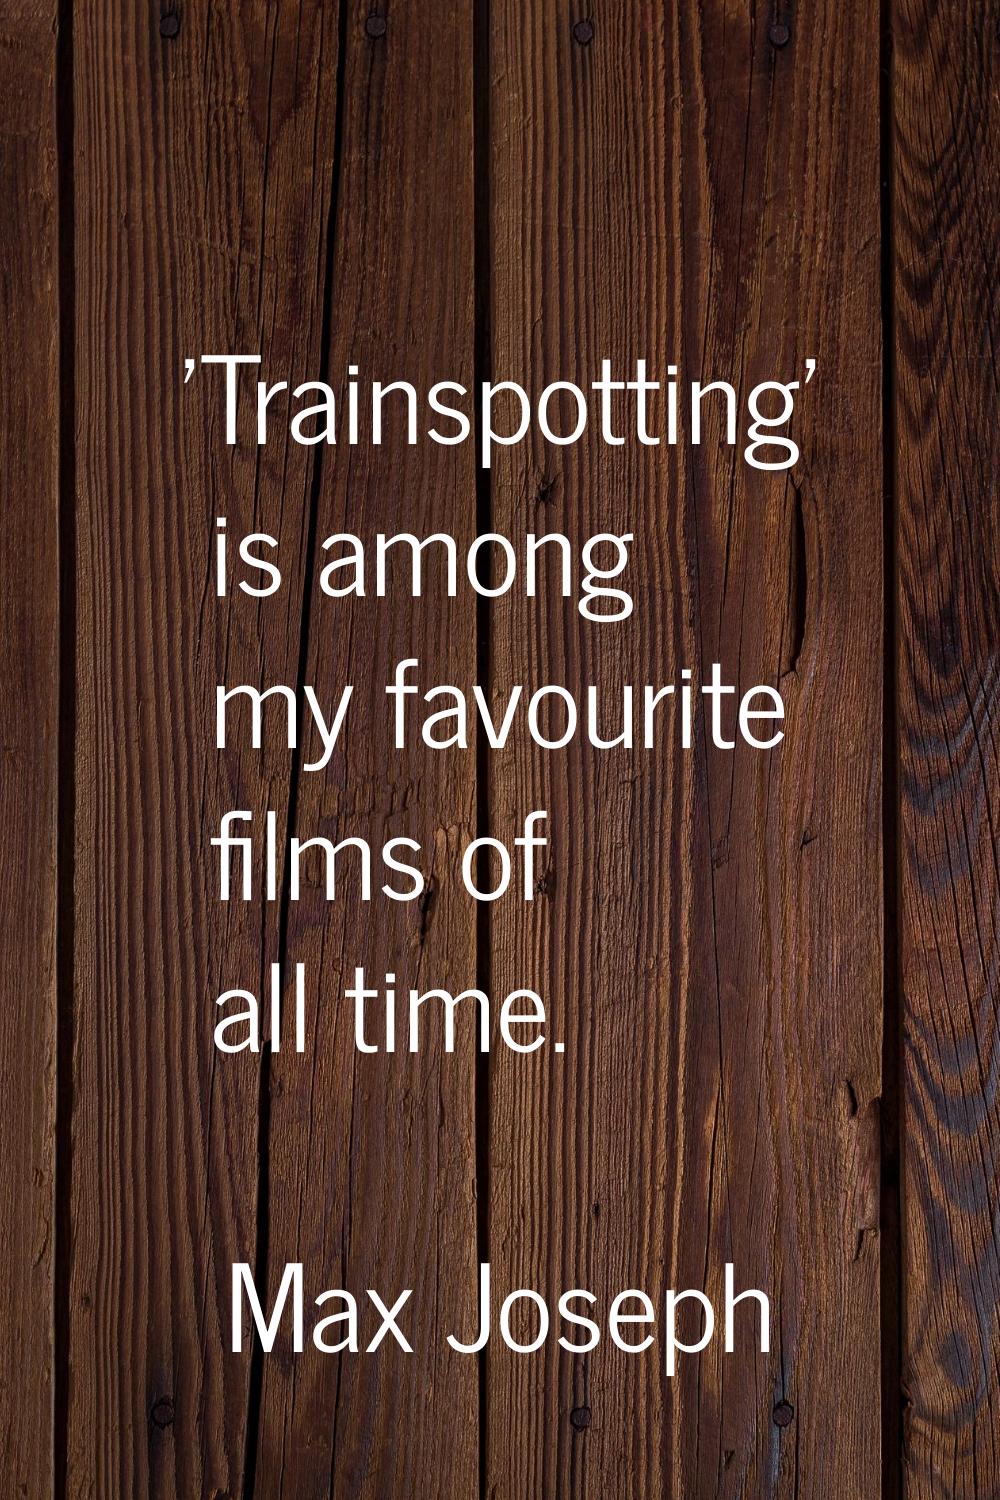 'Trainspotting' is among my favourite films of all time.